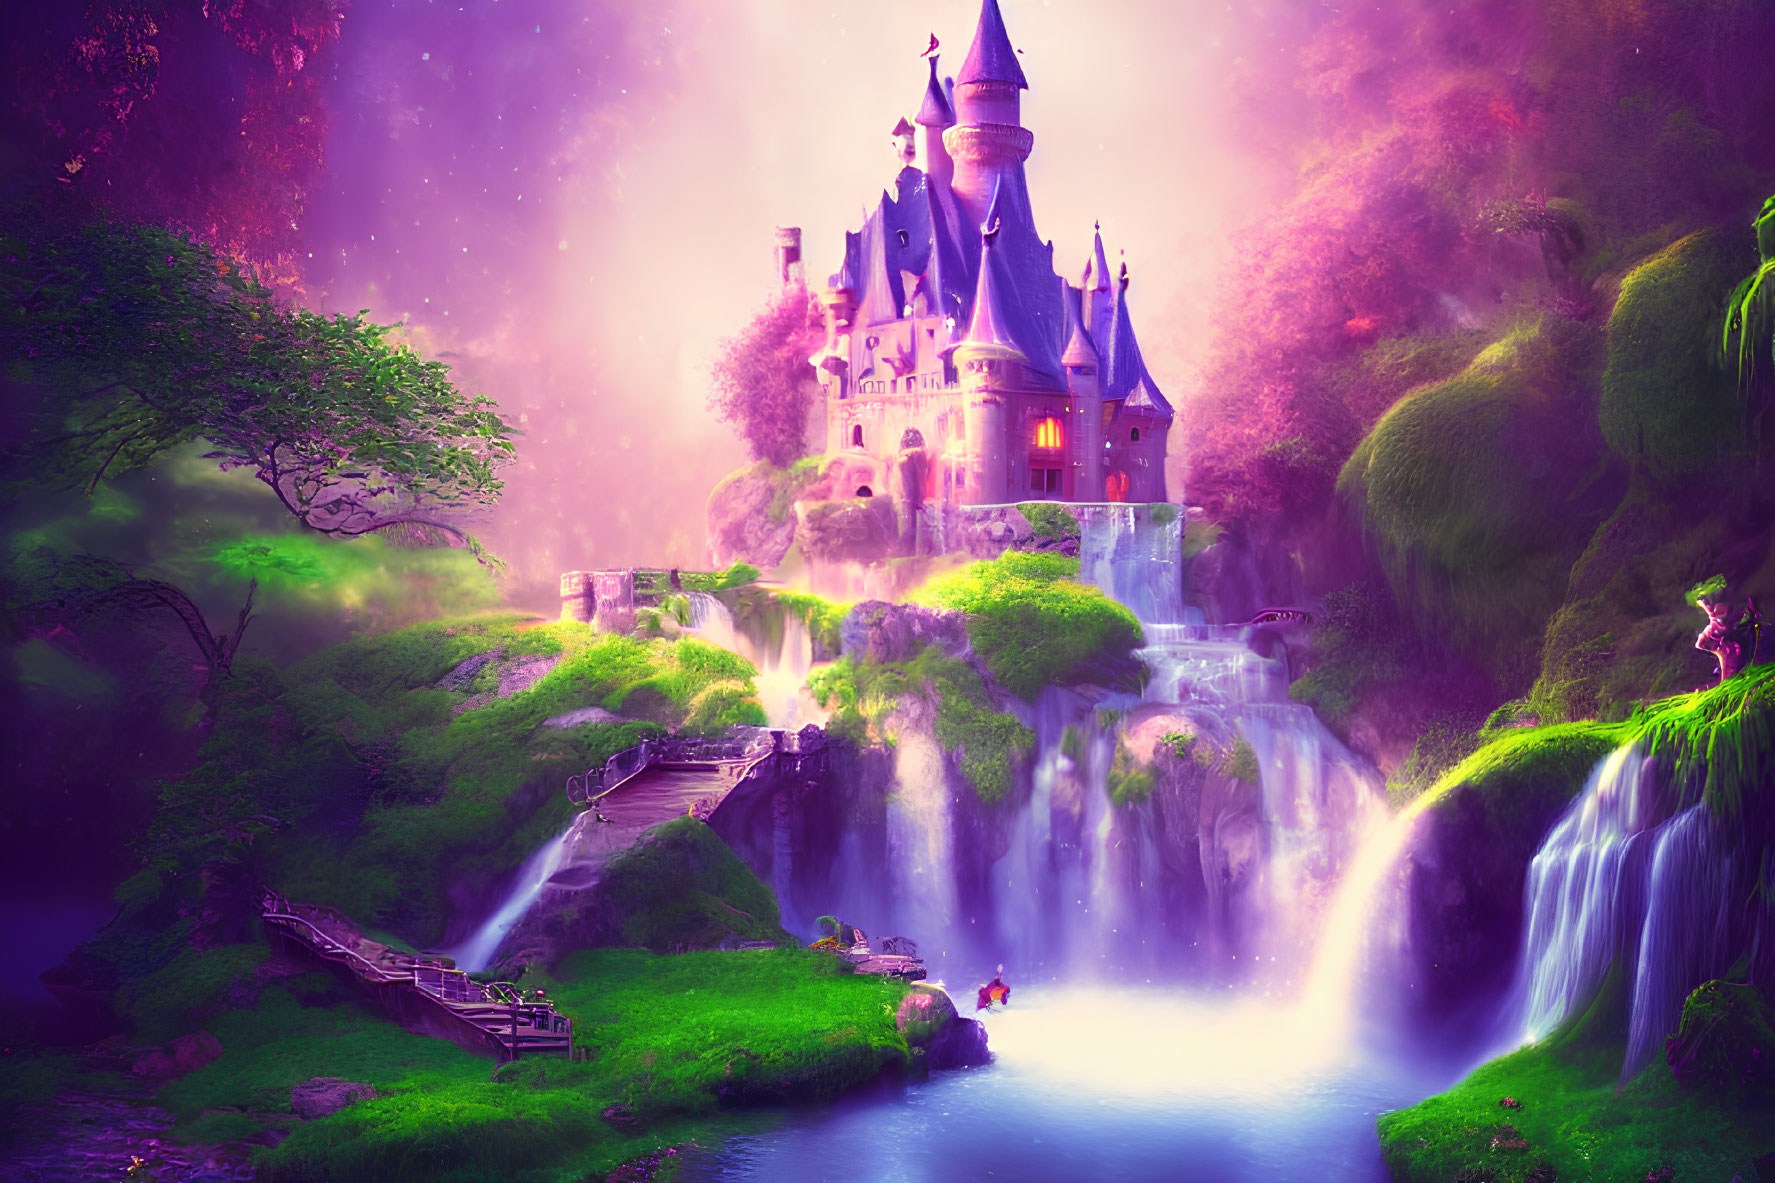 Fantastical castle on waterfall with lush greenery and purple sky